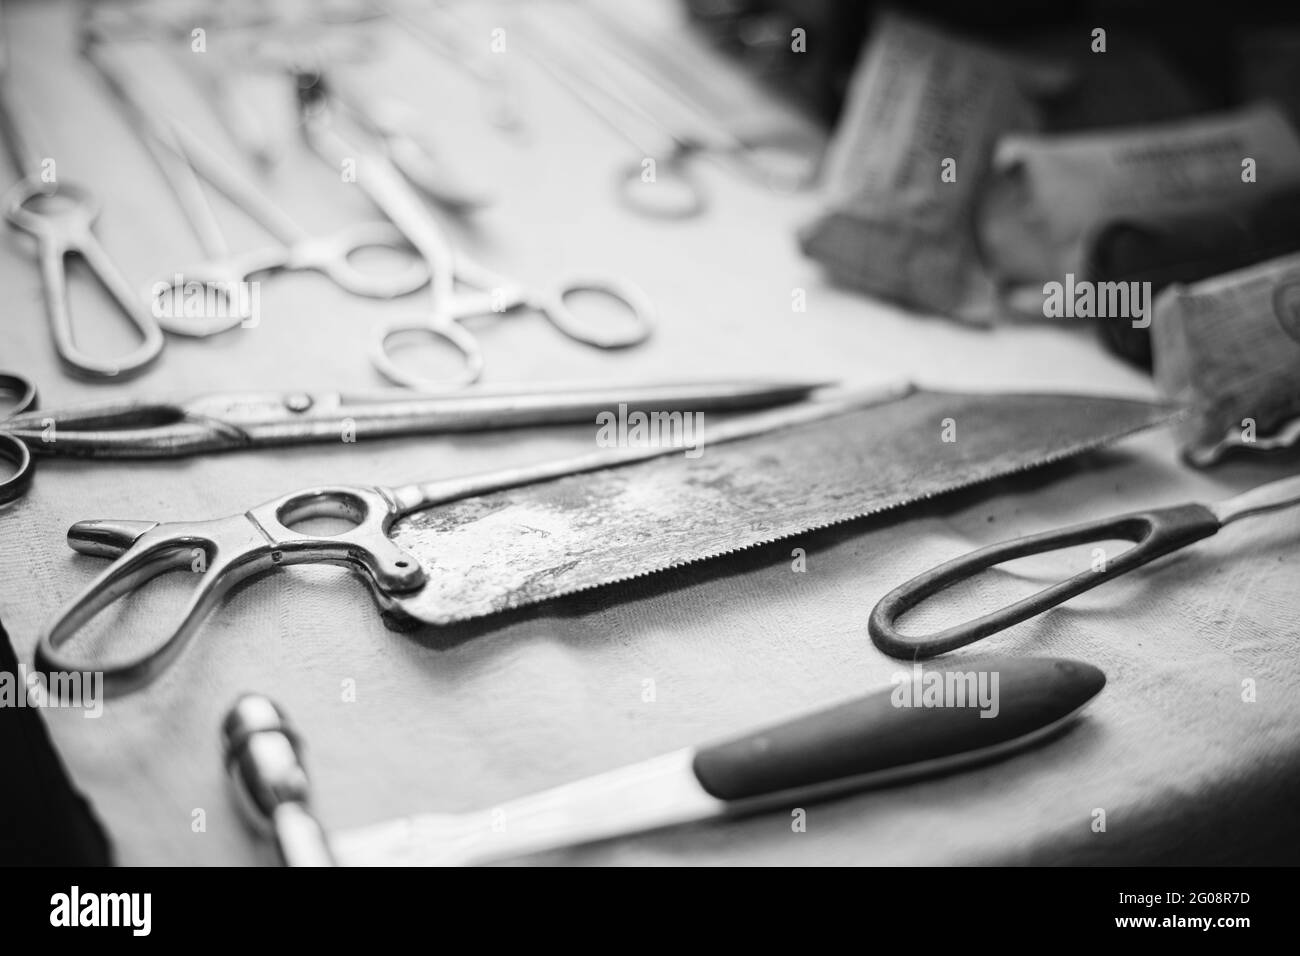 Old medical and surgical instruments. German Deutsch Wehrmacht World War II Times Many Old surgical instruments For surgery. WWII WW2. Black And White Stock Photo